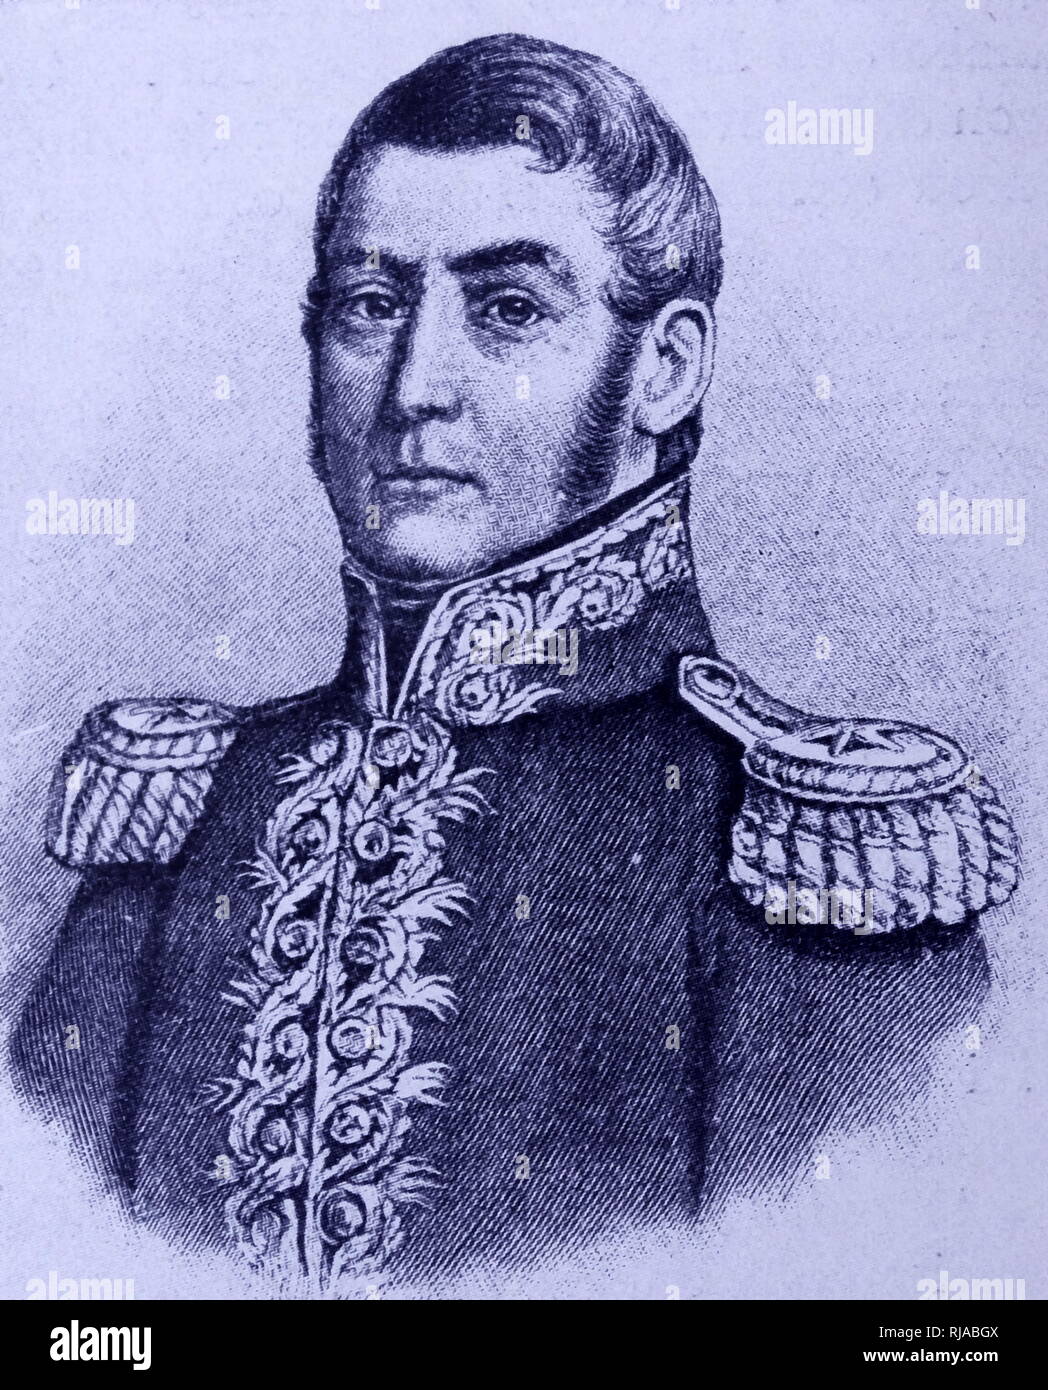 portrait of José Francisco de San Martín, (1778 – 1850); El Libertador of Argentina, Chile and Peru. Argentine general and the leader of the southern part of South America's successful struggle for independence from the Spanish Empire. Protector of Peru. Stock Photo